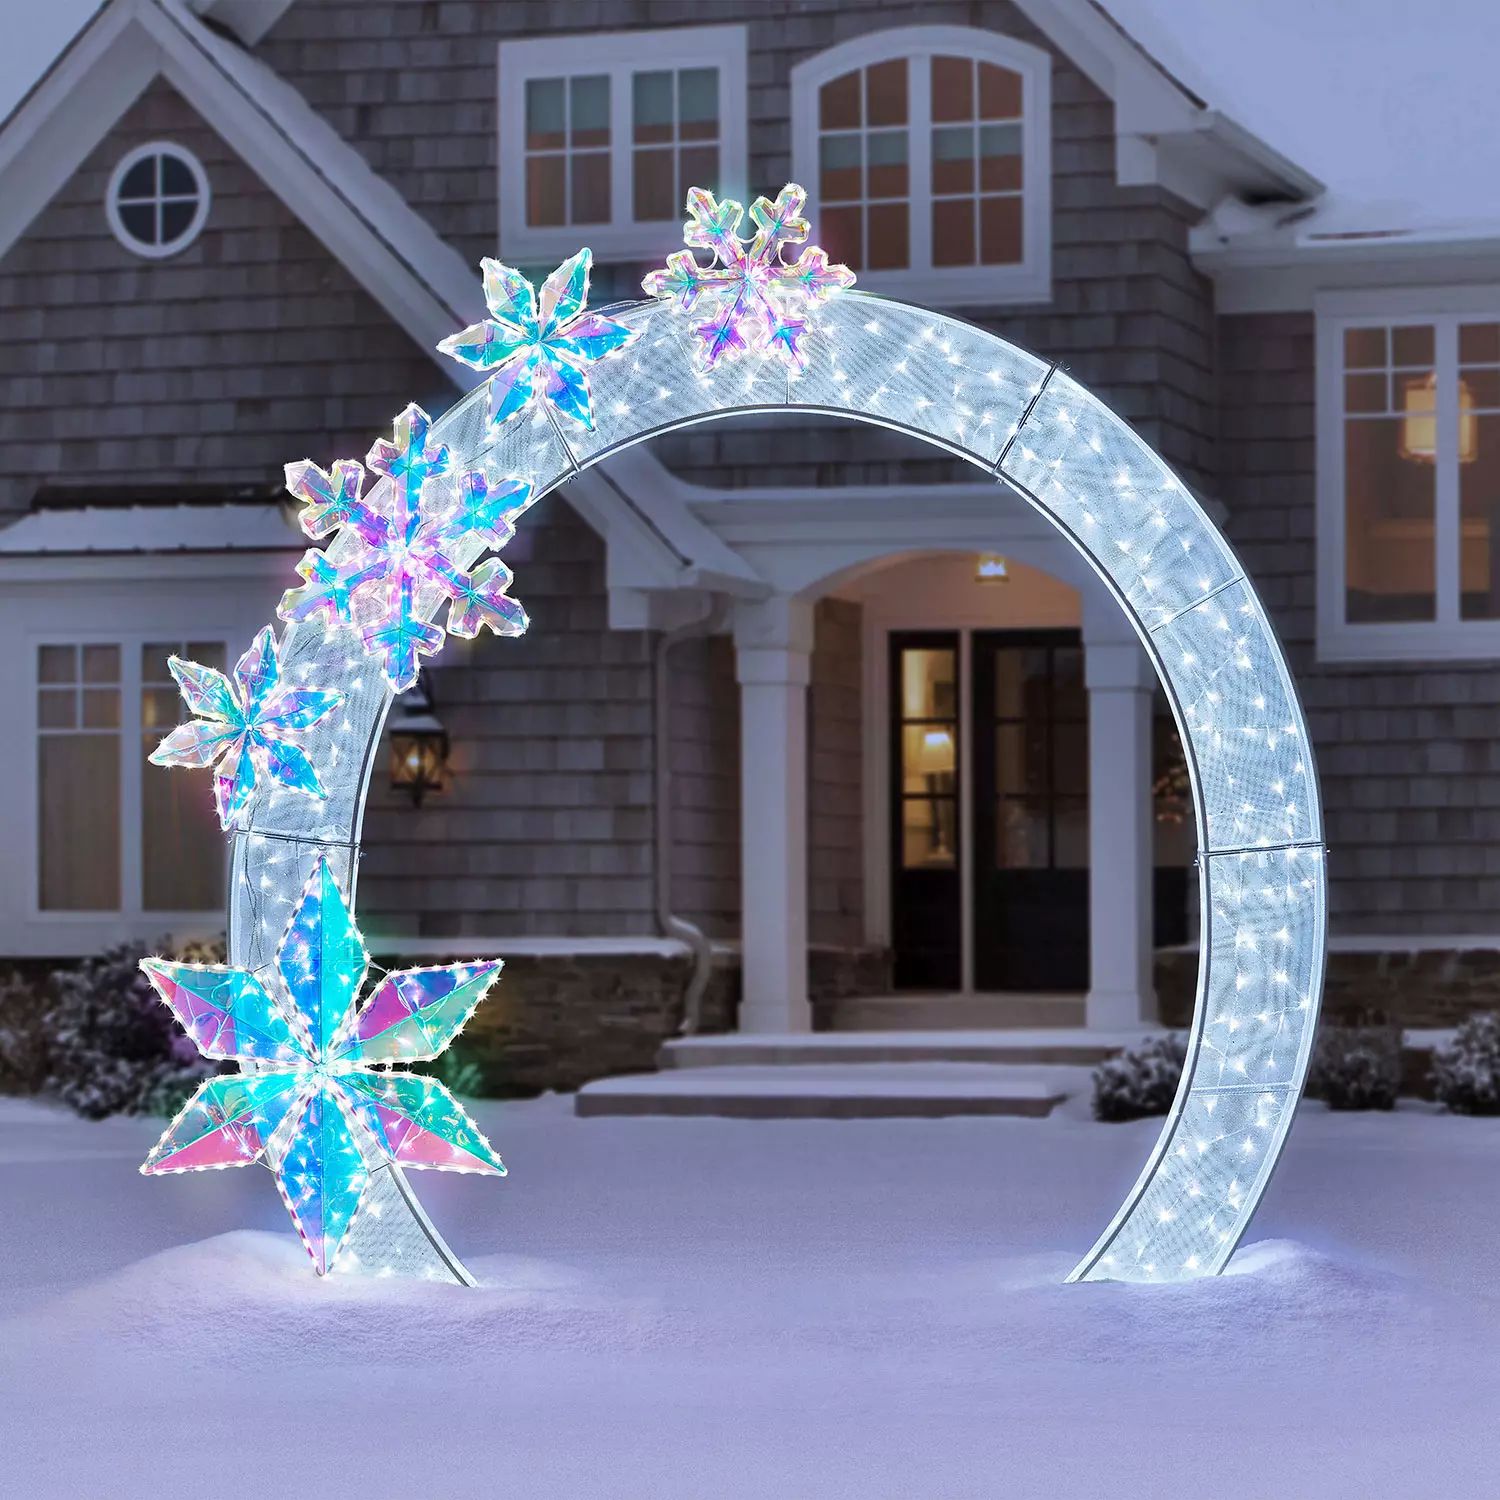 Member's Mark 8' Pre-Lit Arch with Prismatic Snowflakes | Sam's Club